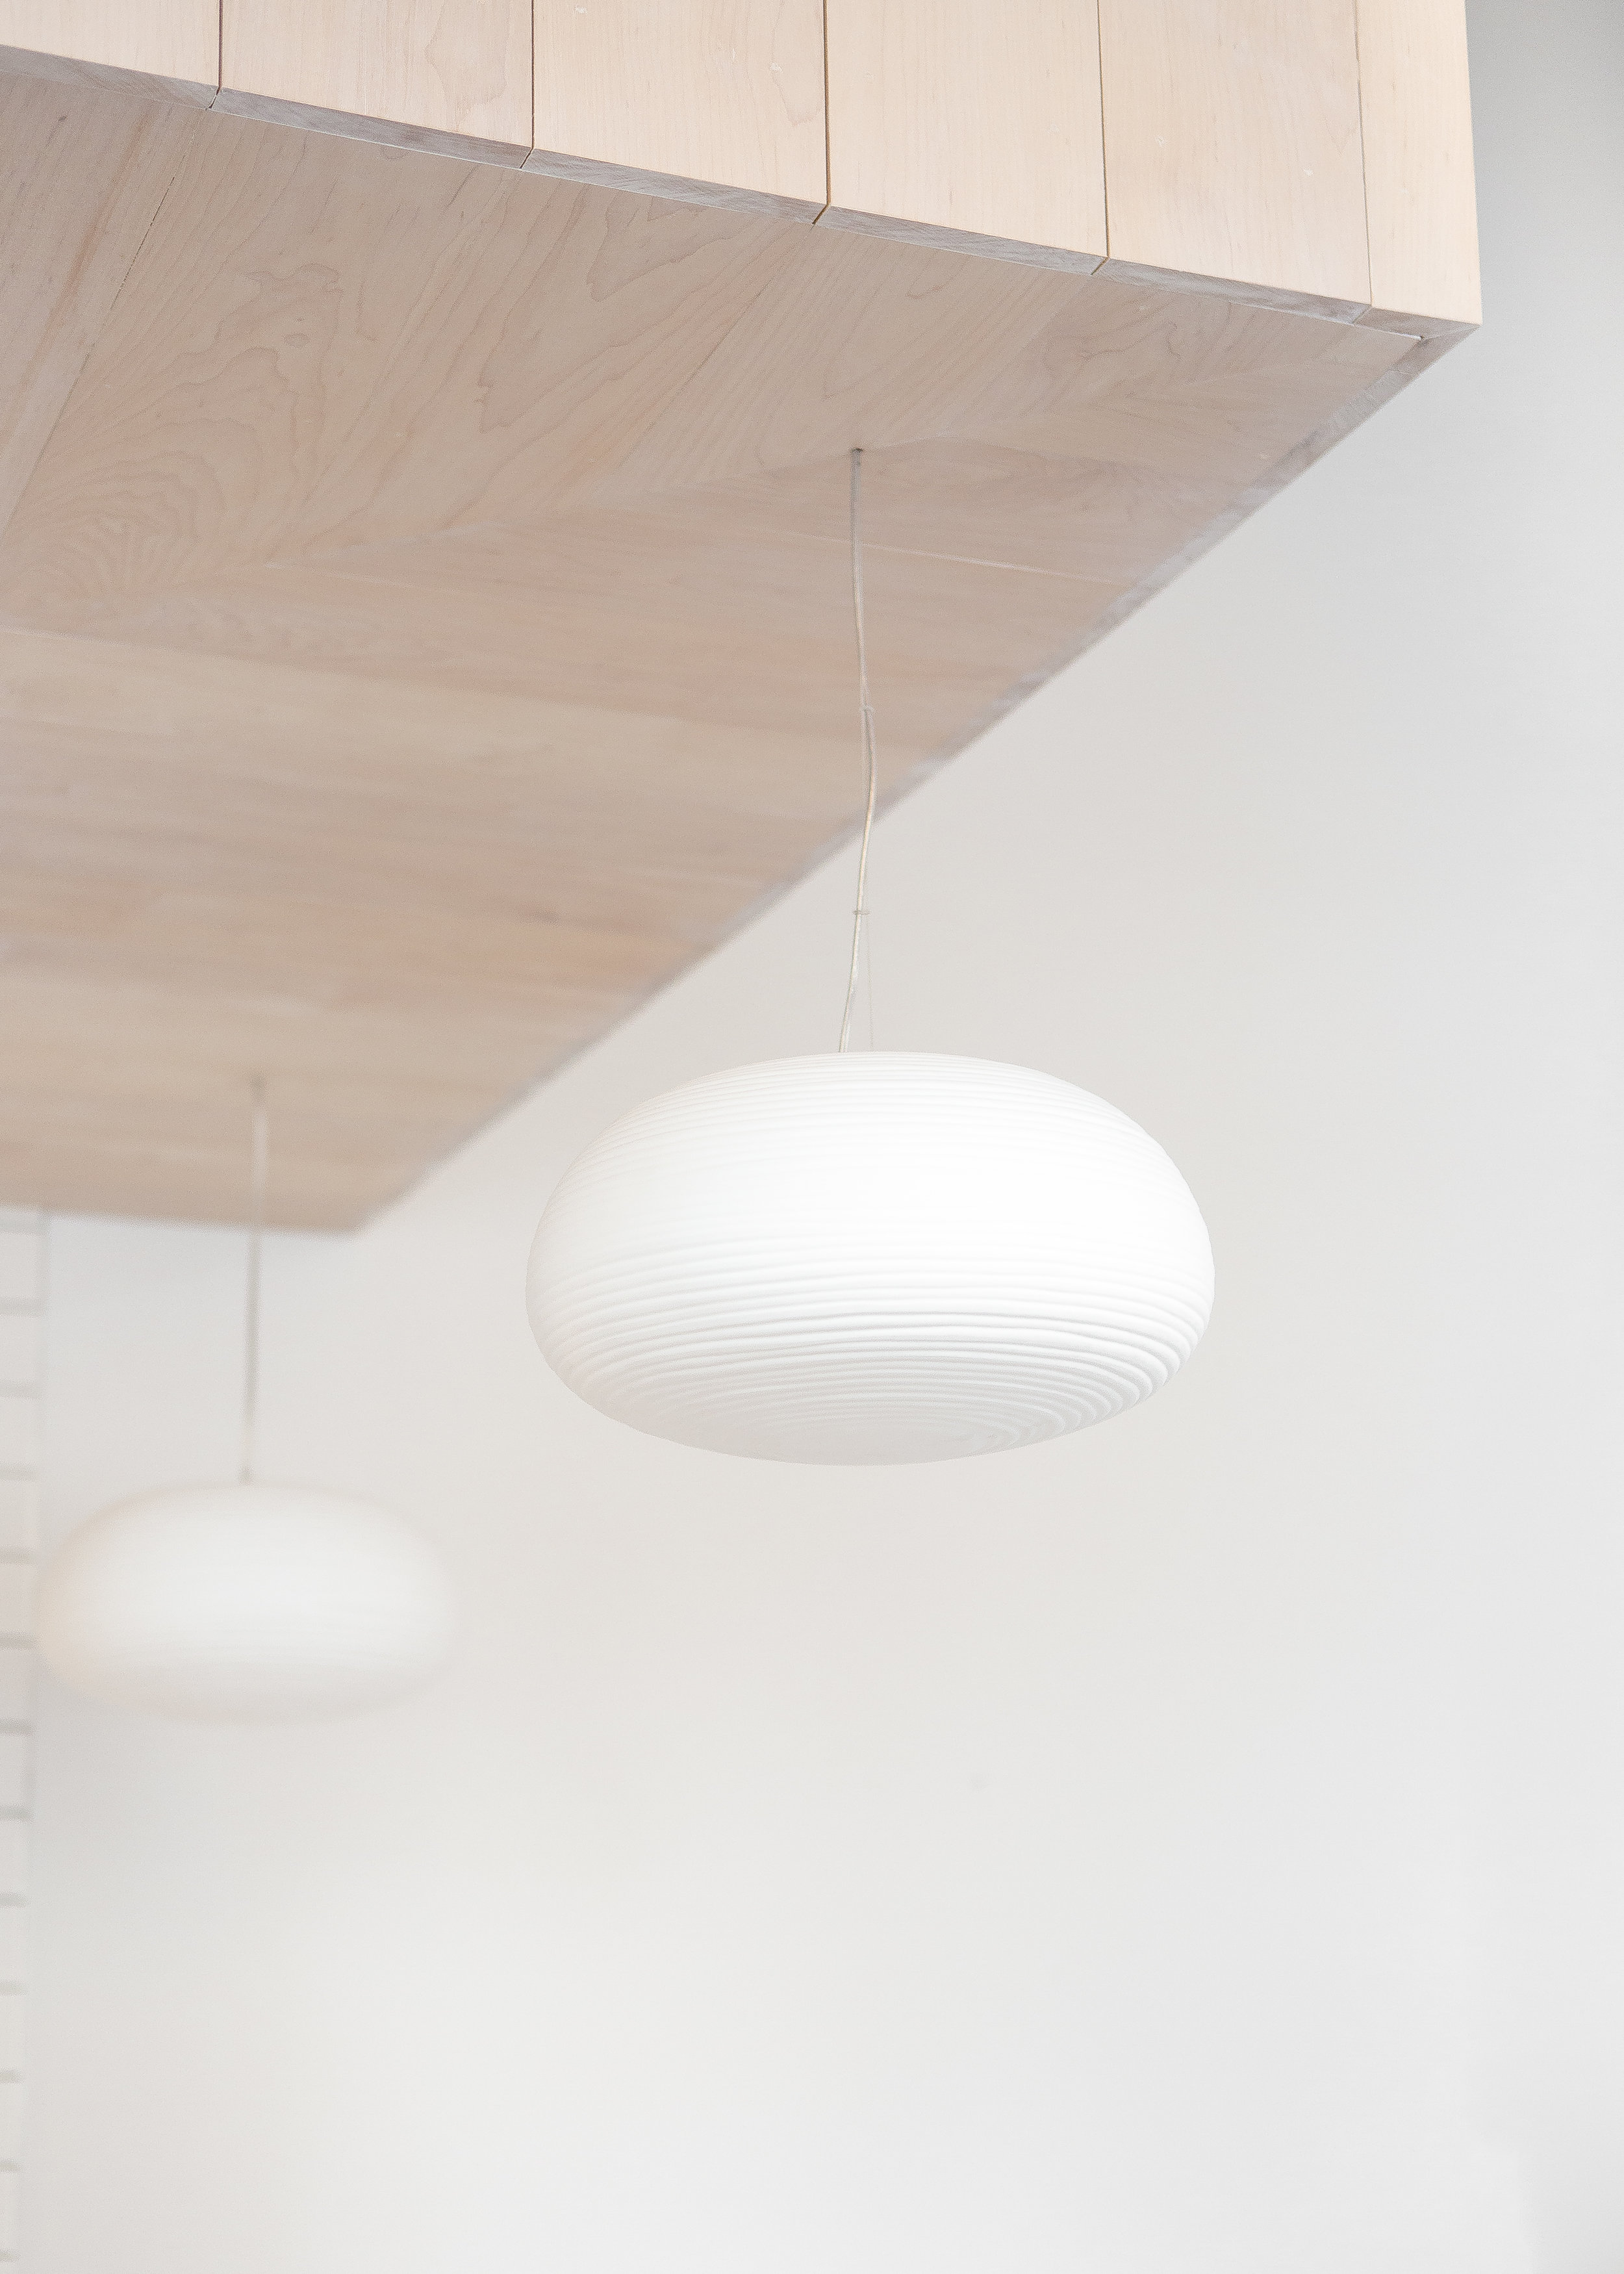 custom wood ceiling detail with white pendant lights